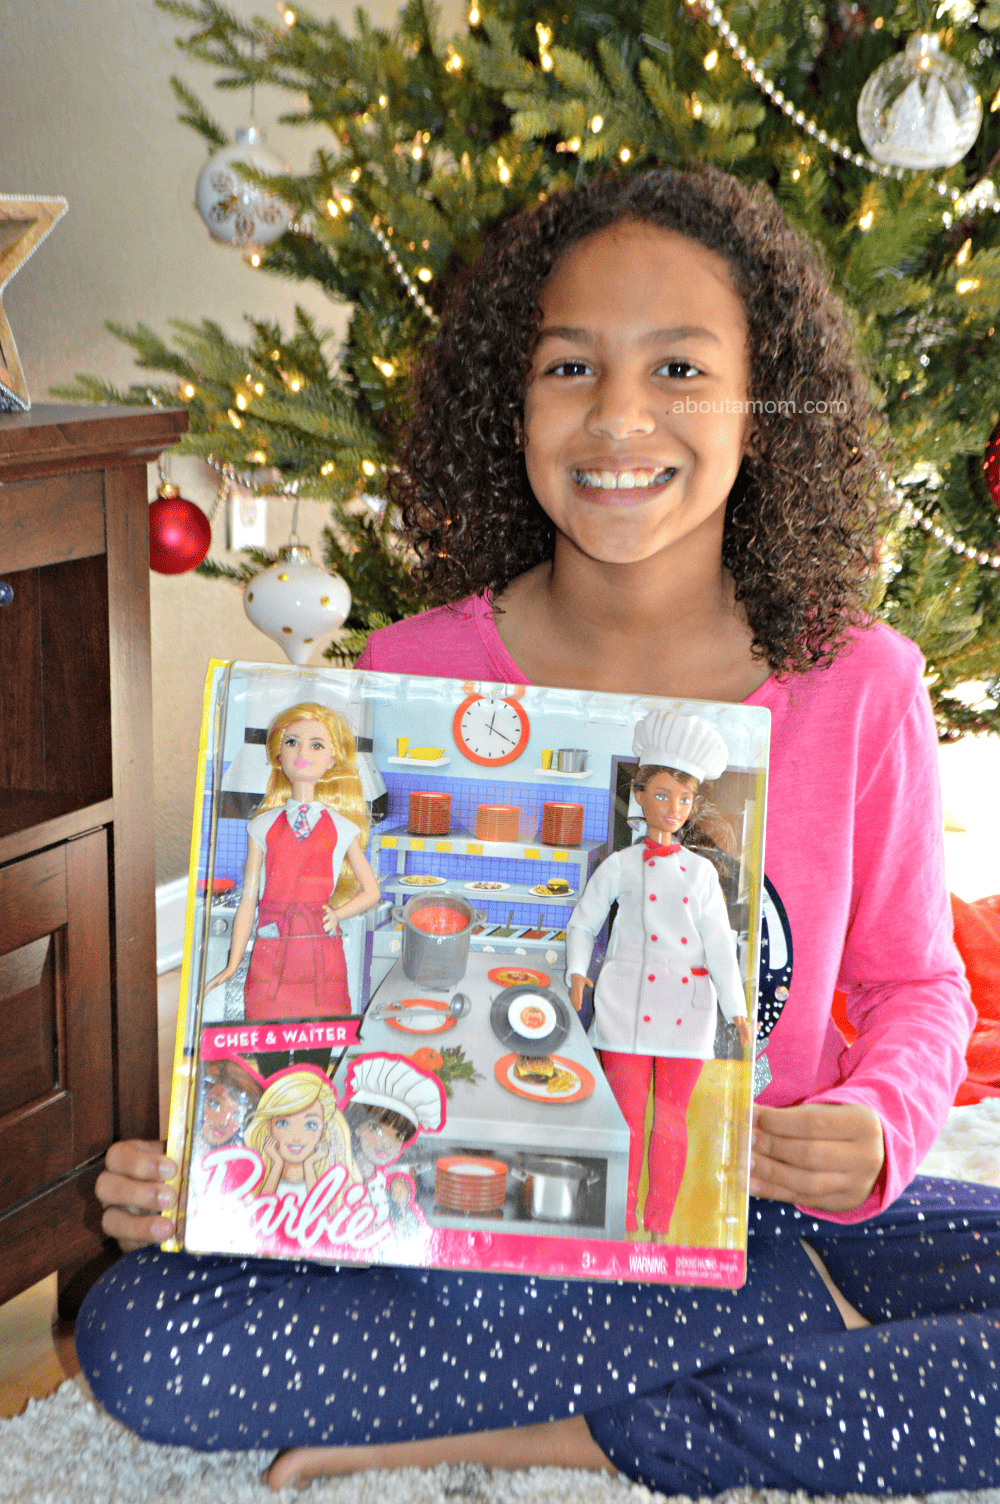 When a little girl plays with Barbie Career Dolls, she imagines everything she can become. From a movie star to a doctor, ballet instructor to NASA Astronaut, Barbie can help inspire your daughter to grow up and become anything!